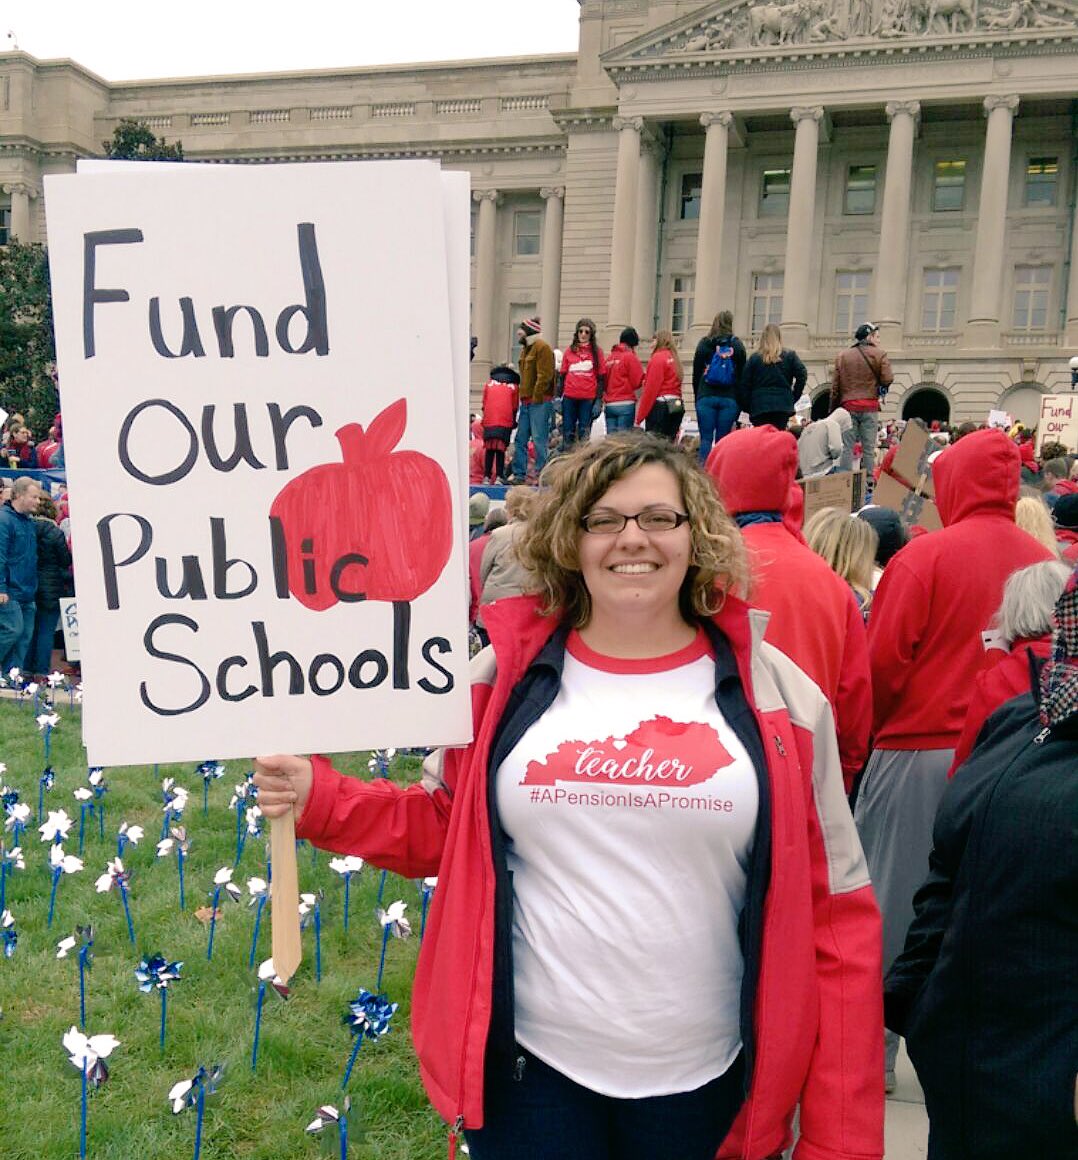 I proudly stood among thousands of my fellow #kentuckyteachers today in support of #PublicEducation. Our teachers, students, and community deserve fully funded public schools. #FundOurSchools #SayNoToCharters #APensionIsAPromise #120strong #WeWillRememberComeNovember